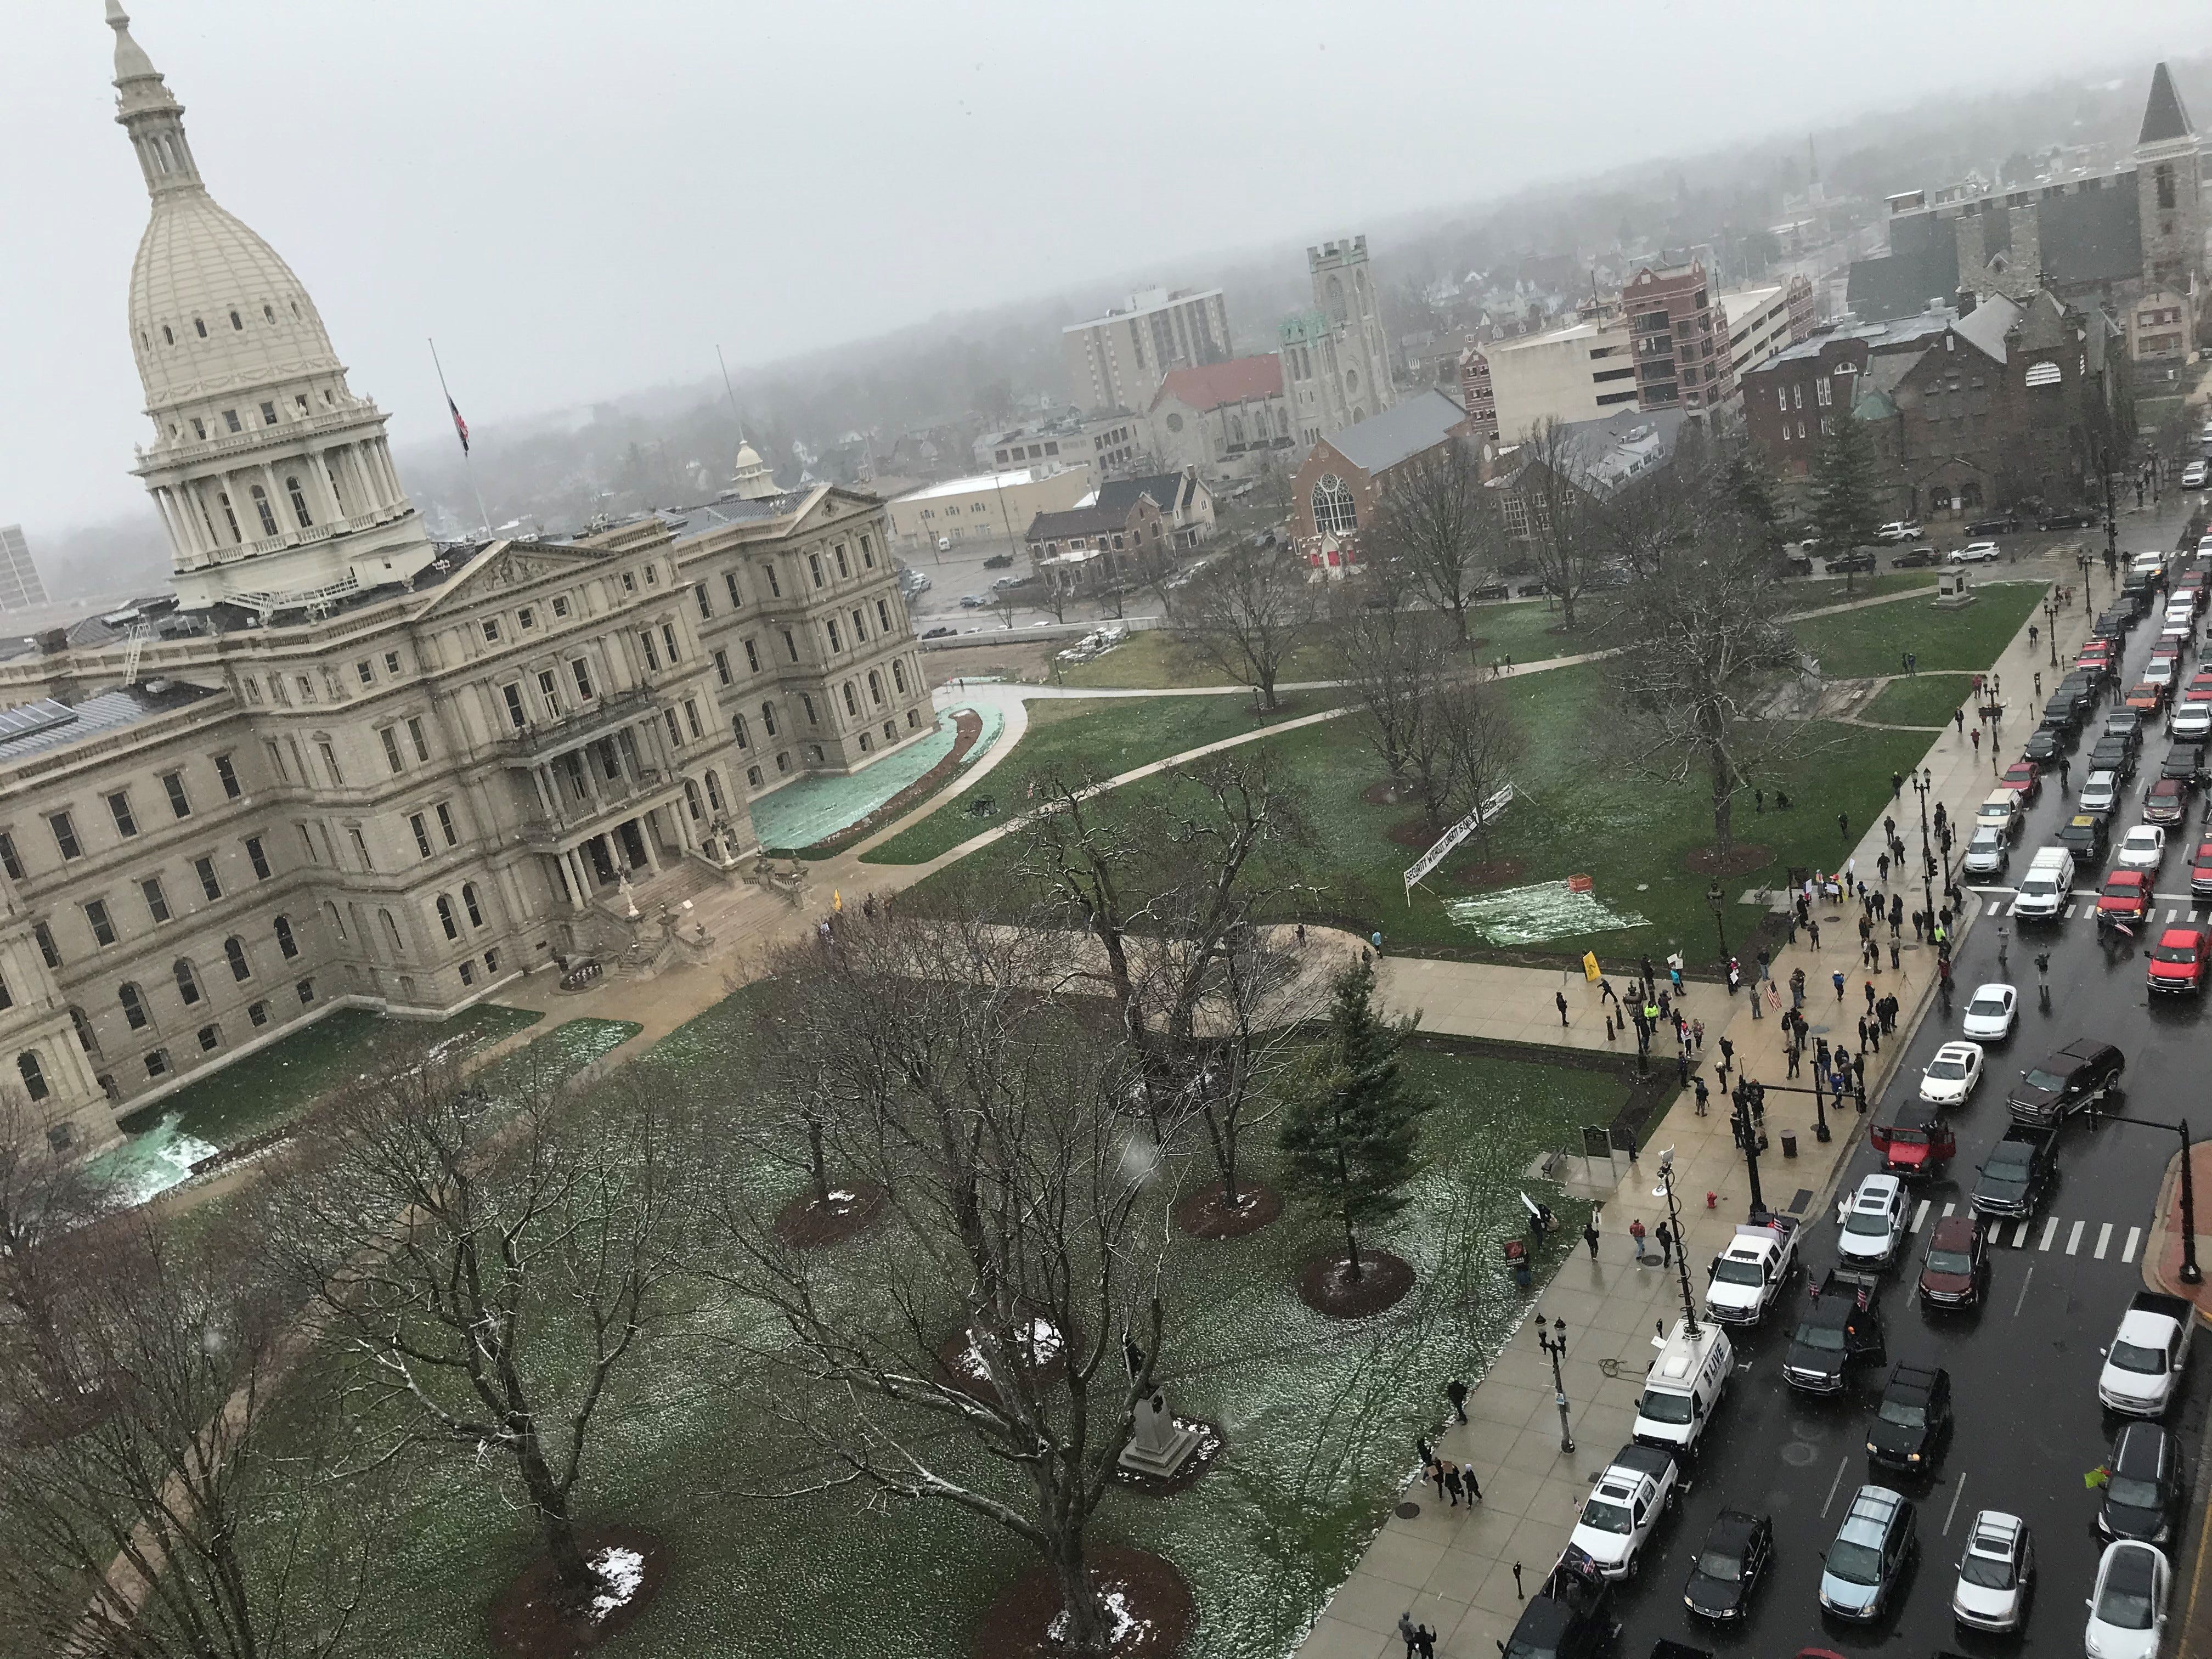 The protest is organized by the Michigan Conservative Coalition, which told supporters to "come ready for a potentially major traffic jam around the (taxpayer funded) Michigan Capitol Building."